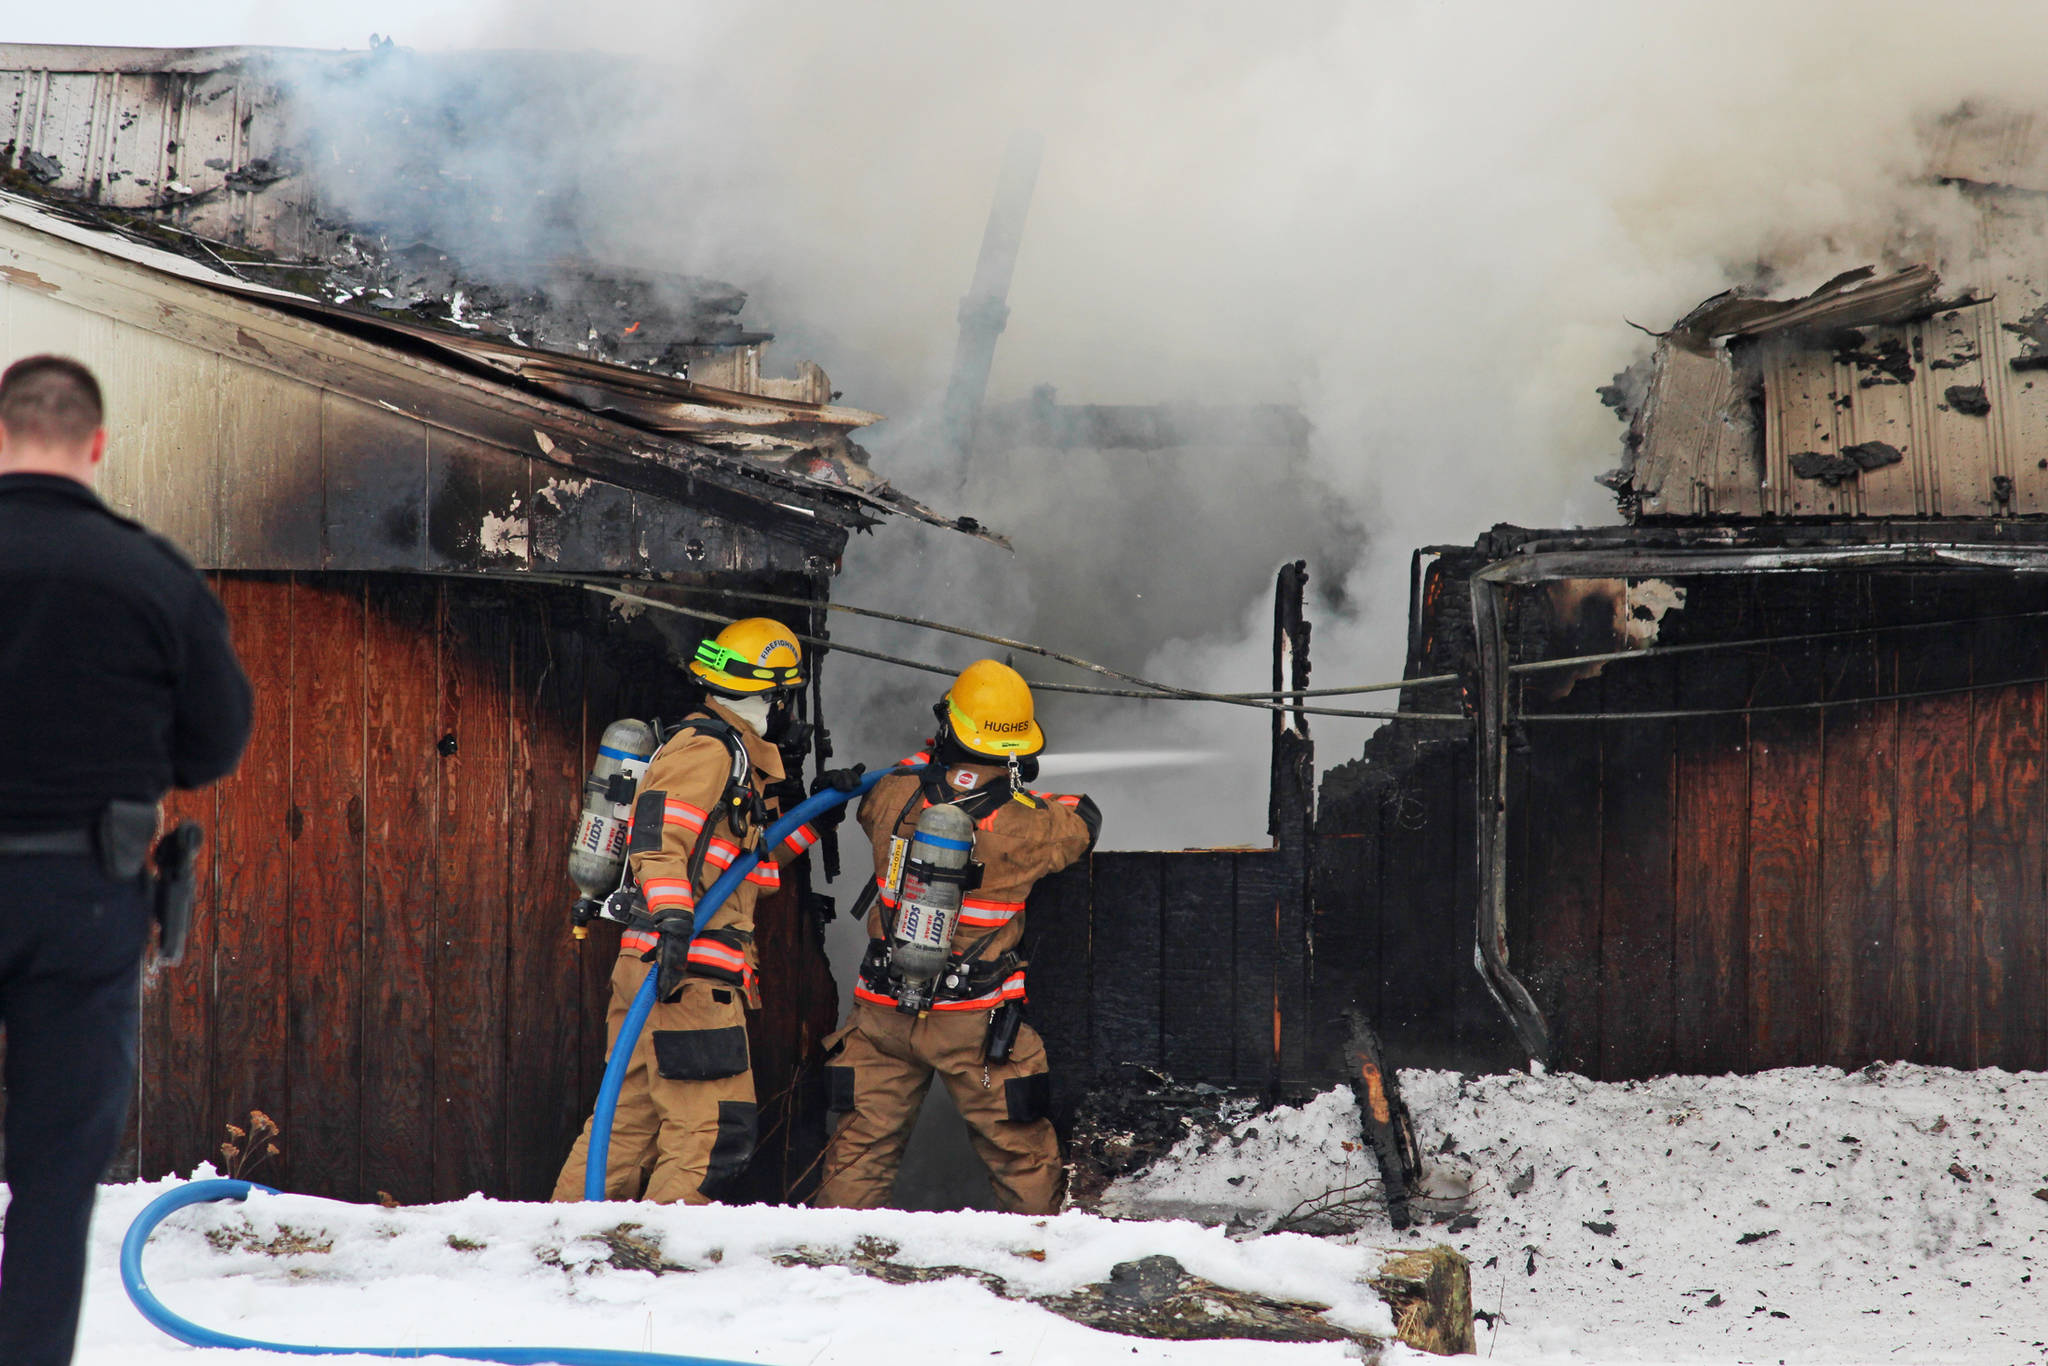 Firefighters douse a blaze that engulfed the old Bay View Inn on the Sterling Highway near the Baycrest Overlook on Thursday, March 7, 2019 in Homer, Alaska. (Photo by Megan Pacer/Homer News)